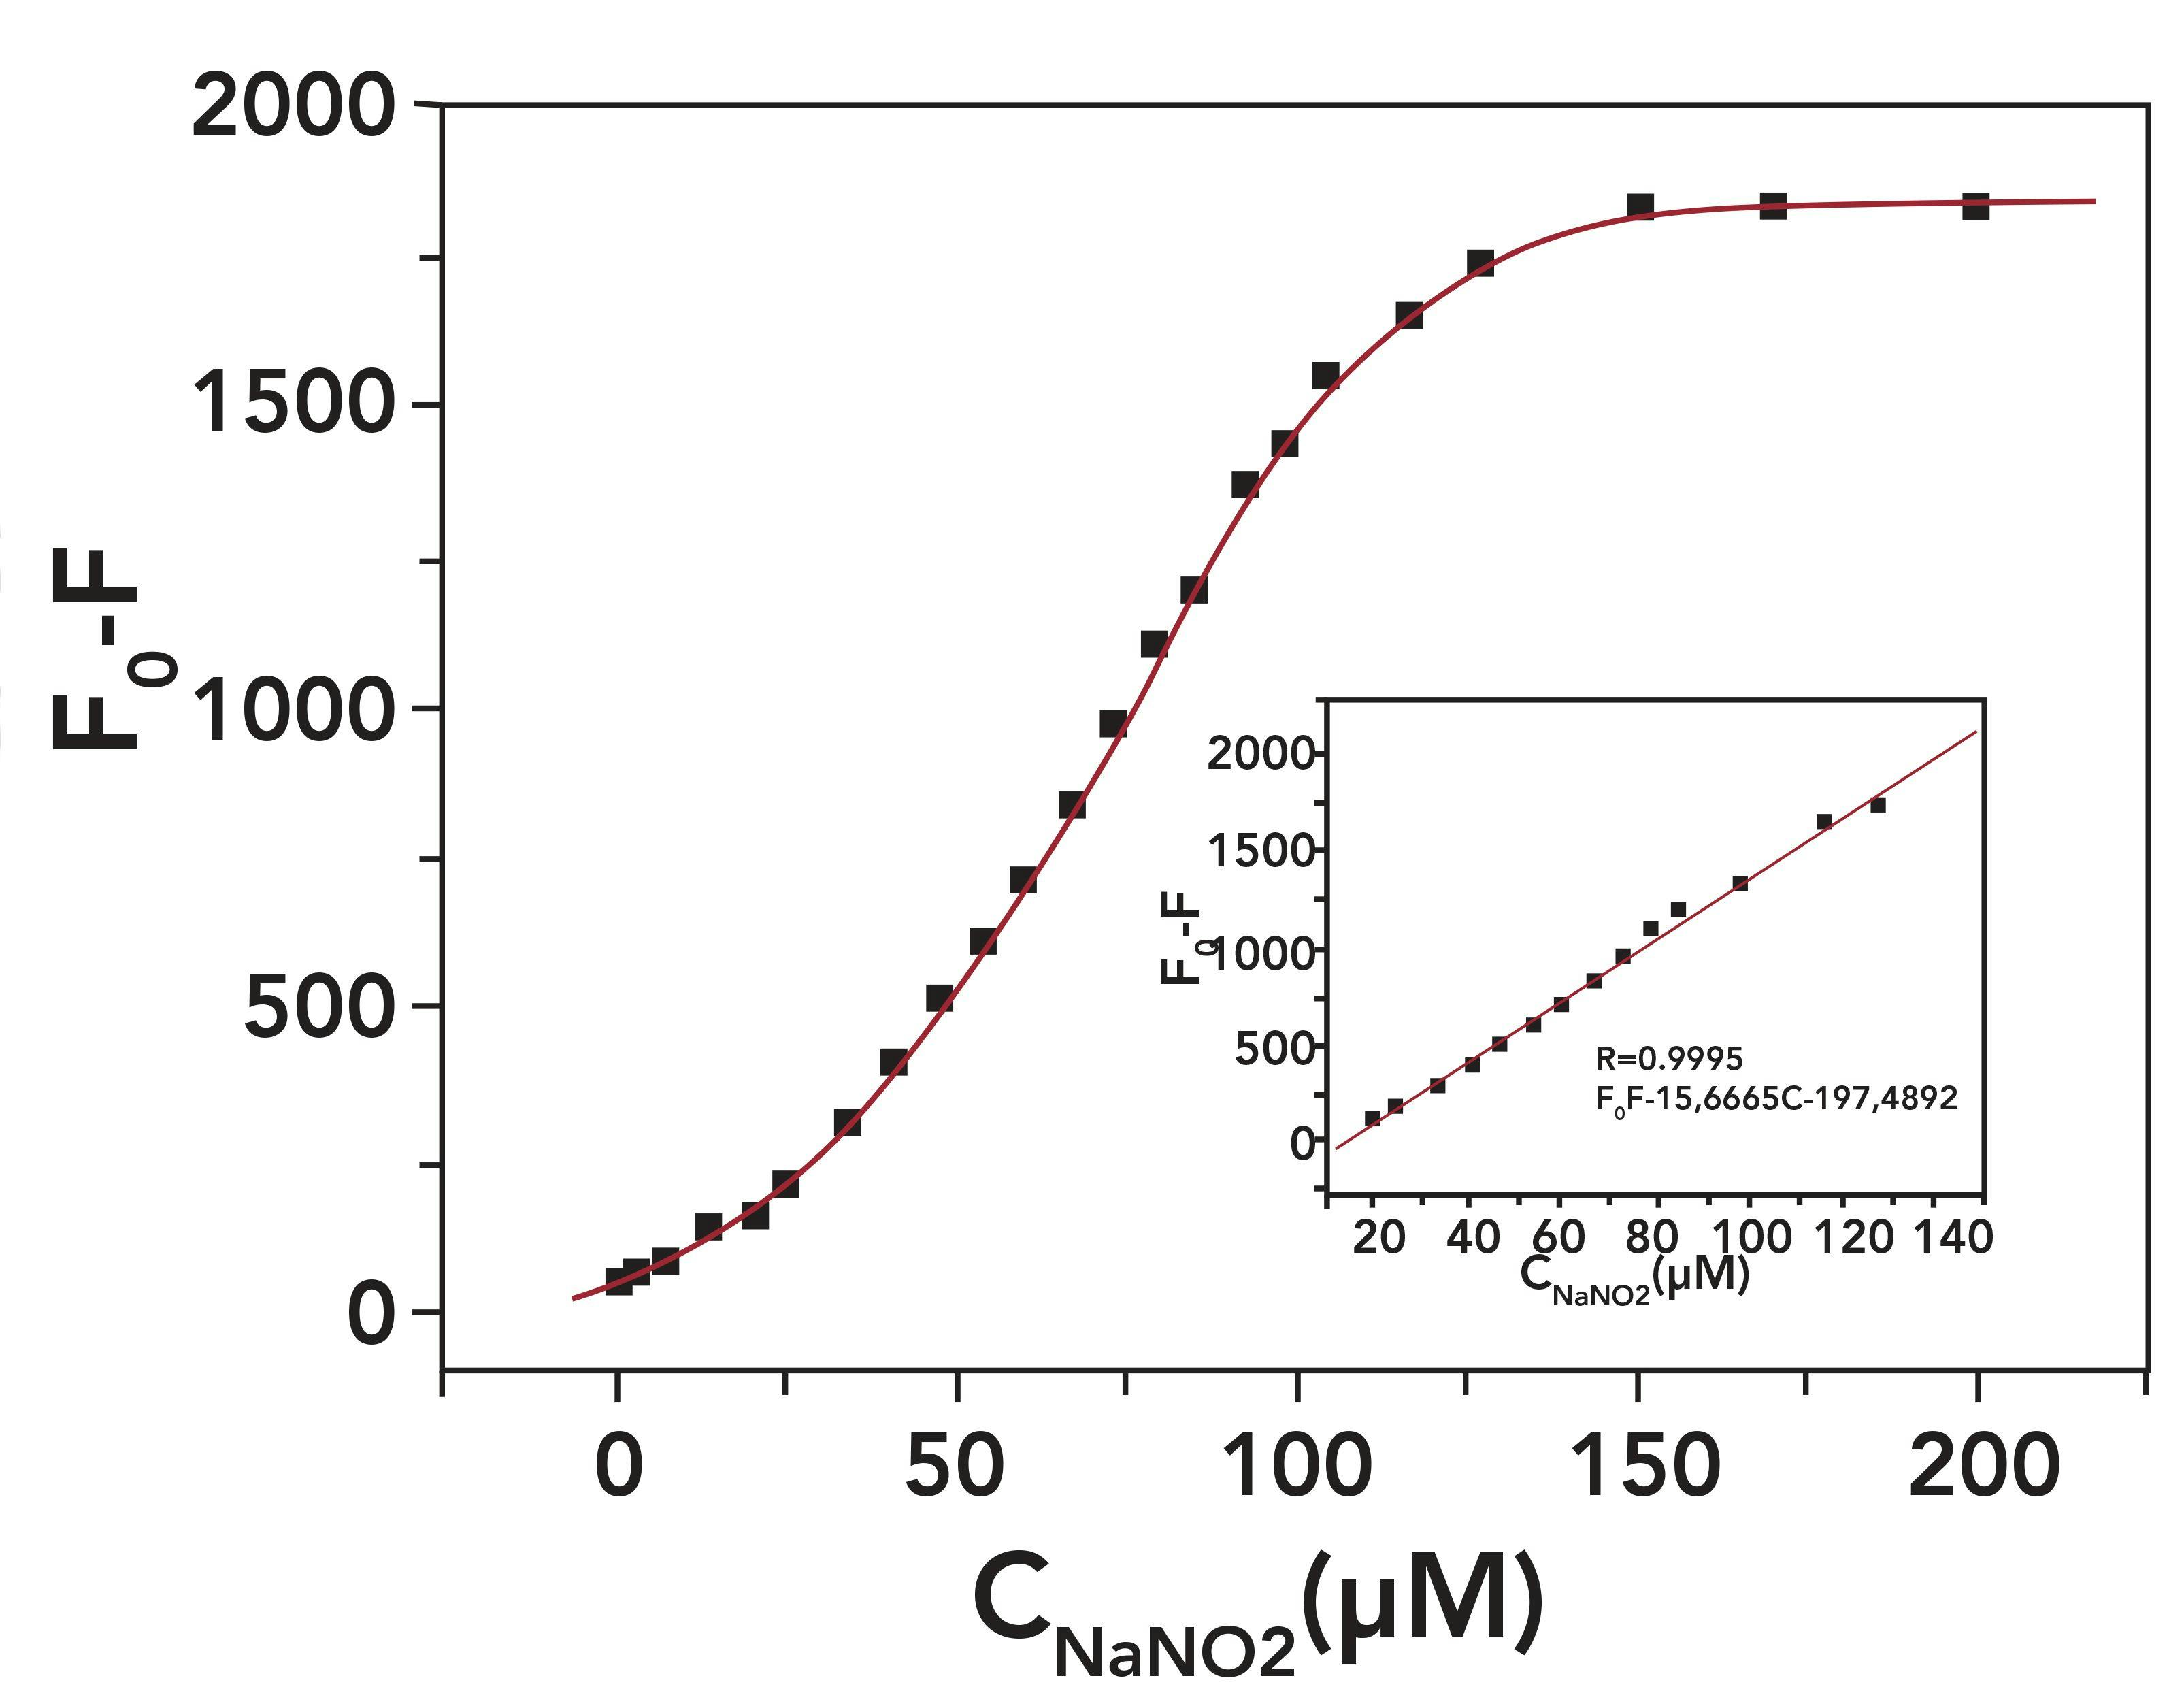 FIGURE 4: The relationship between F0-F and the concentration of nitrite. Inset shows linear range for the relationship between F0-F and the concentration of nitrite, from approximately 15 to 145 μM.